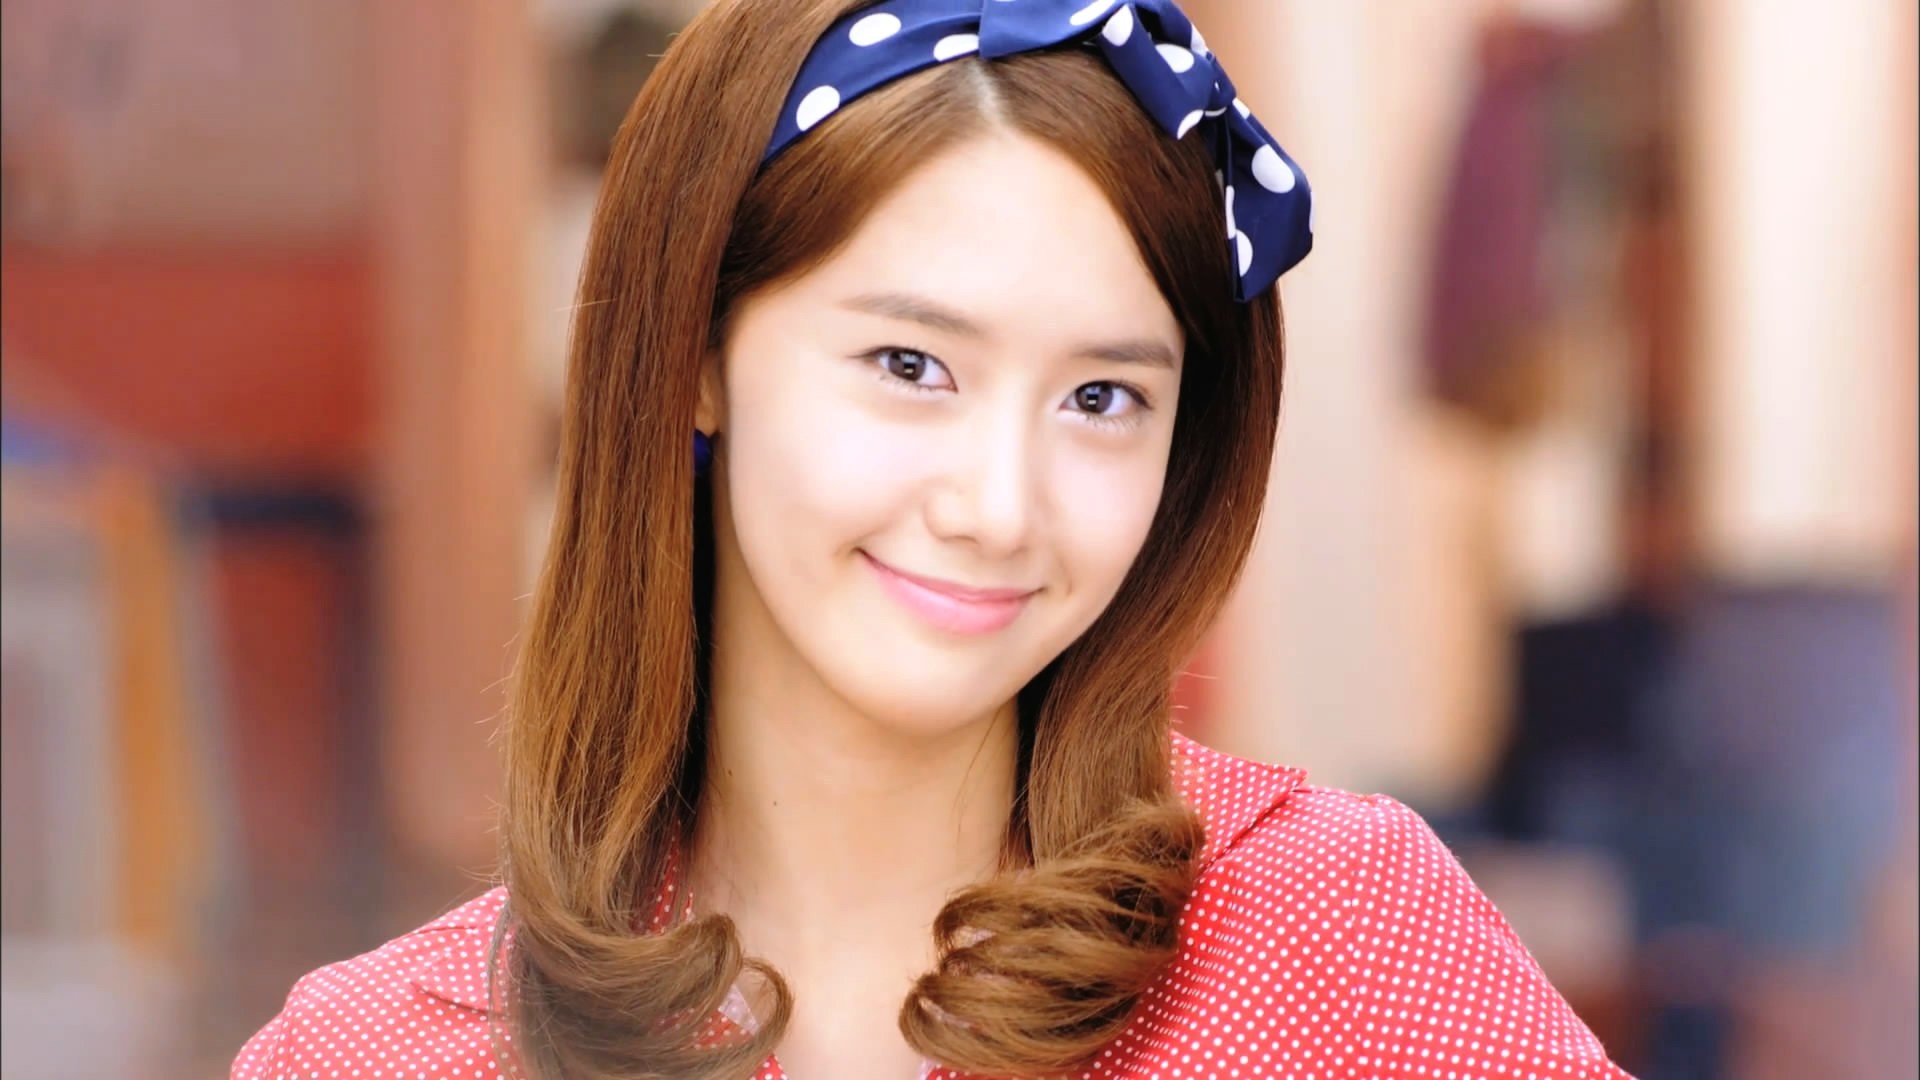 1920x1080 HD Wallpaper and background photos of â¥Yoona Japanese Geeâ¥ for fans of  Girls Generation/SNSD images.